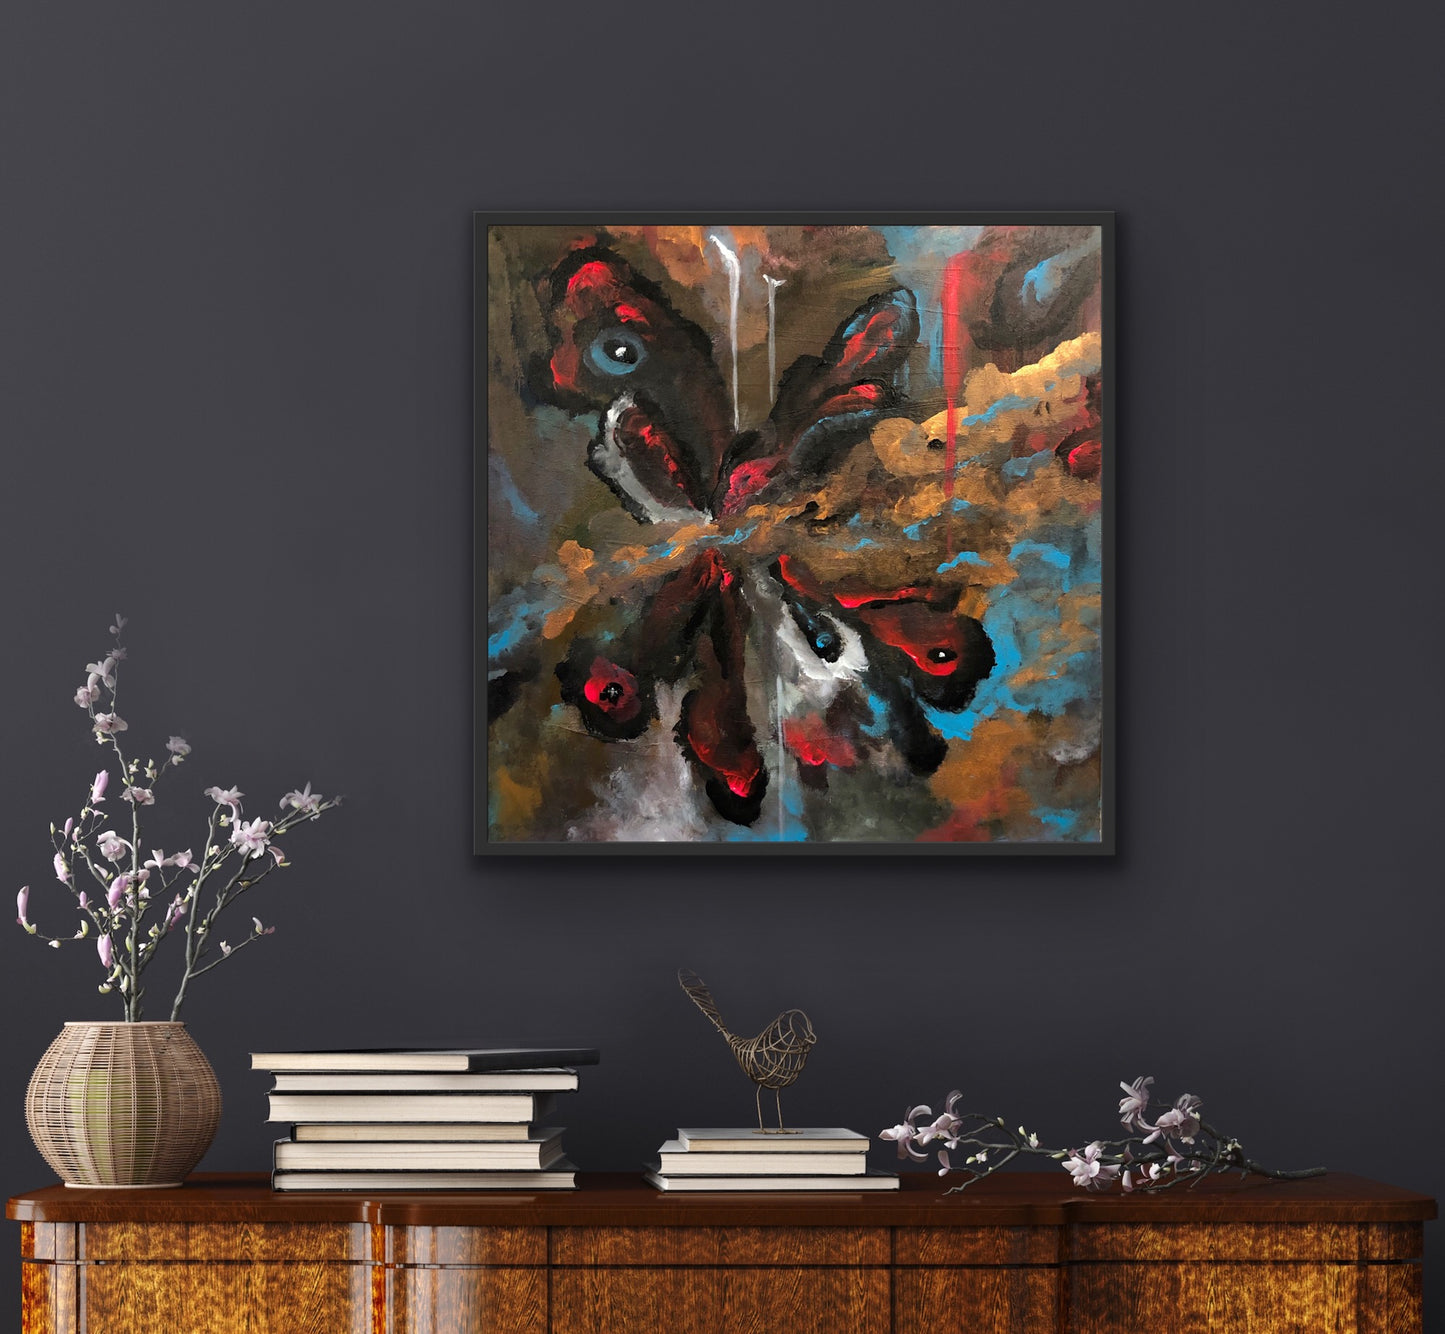 ORIGINAL ARTwork abstract acrylic painting "Butterfly spirit"